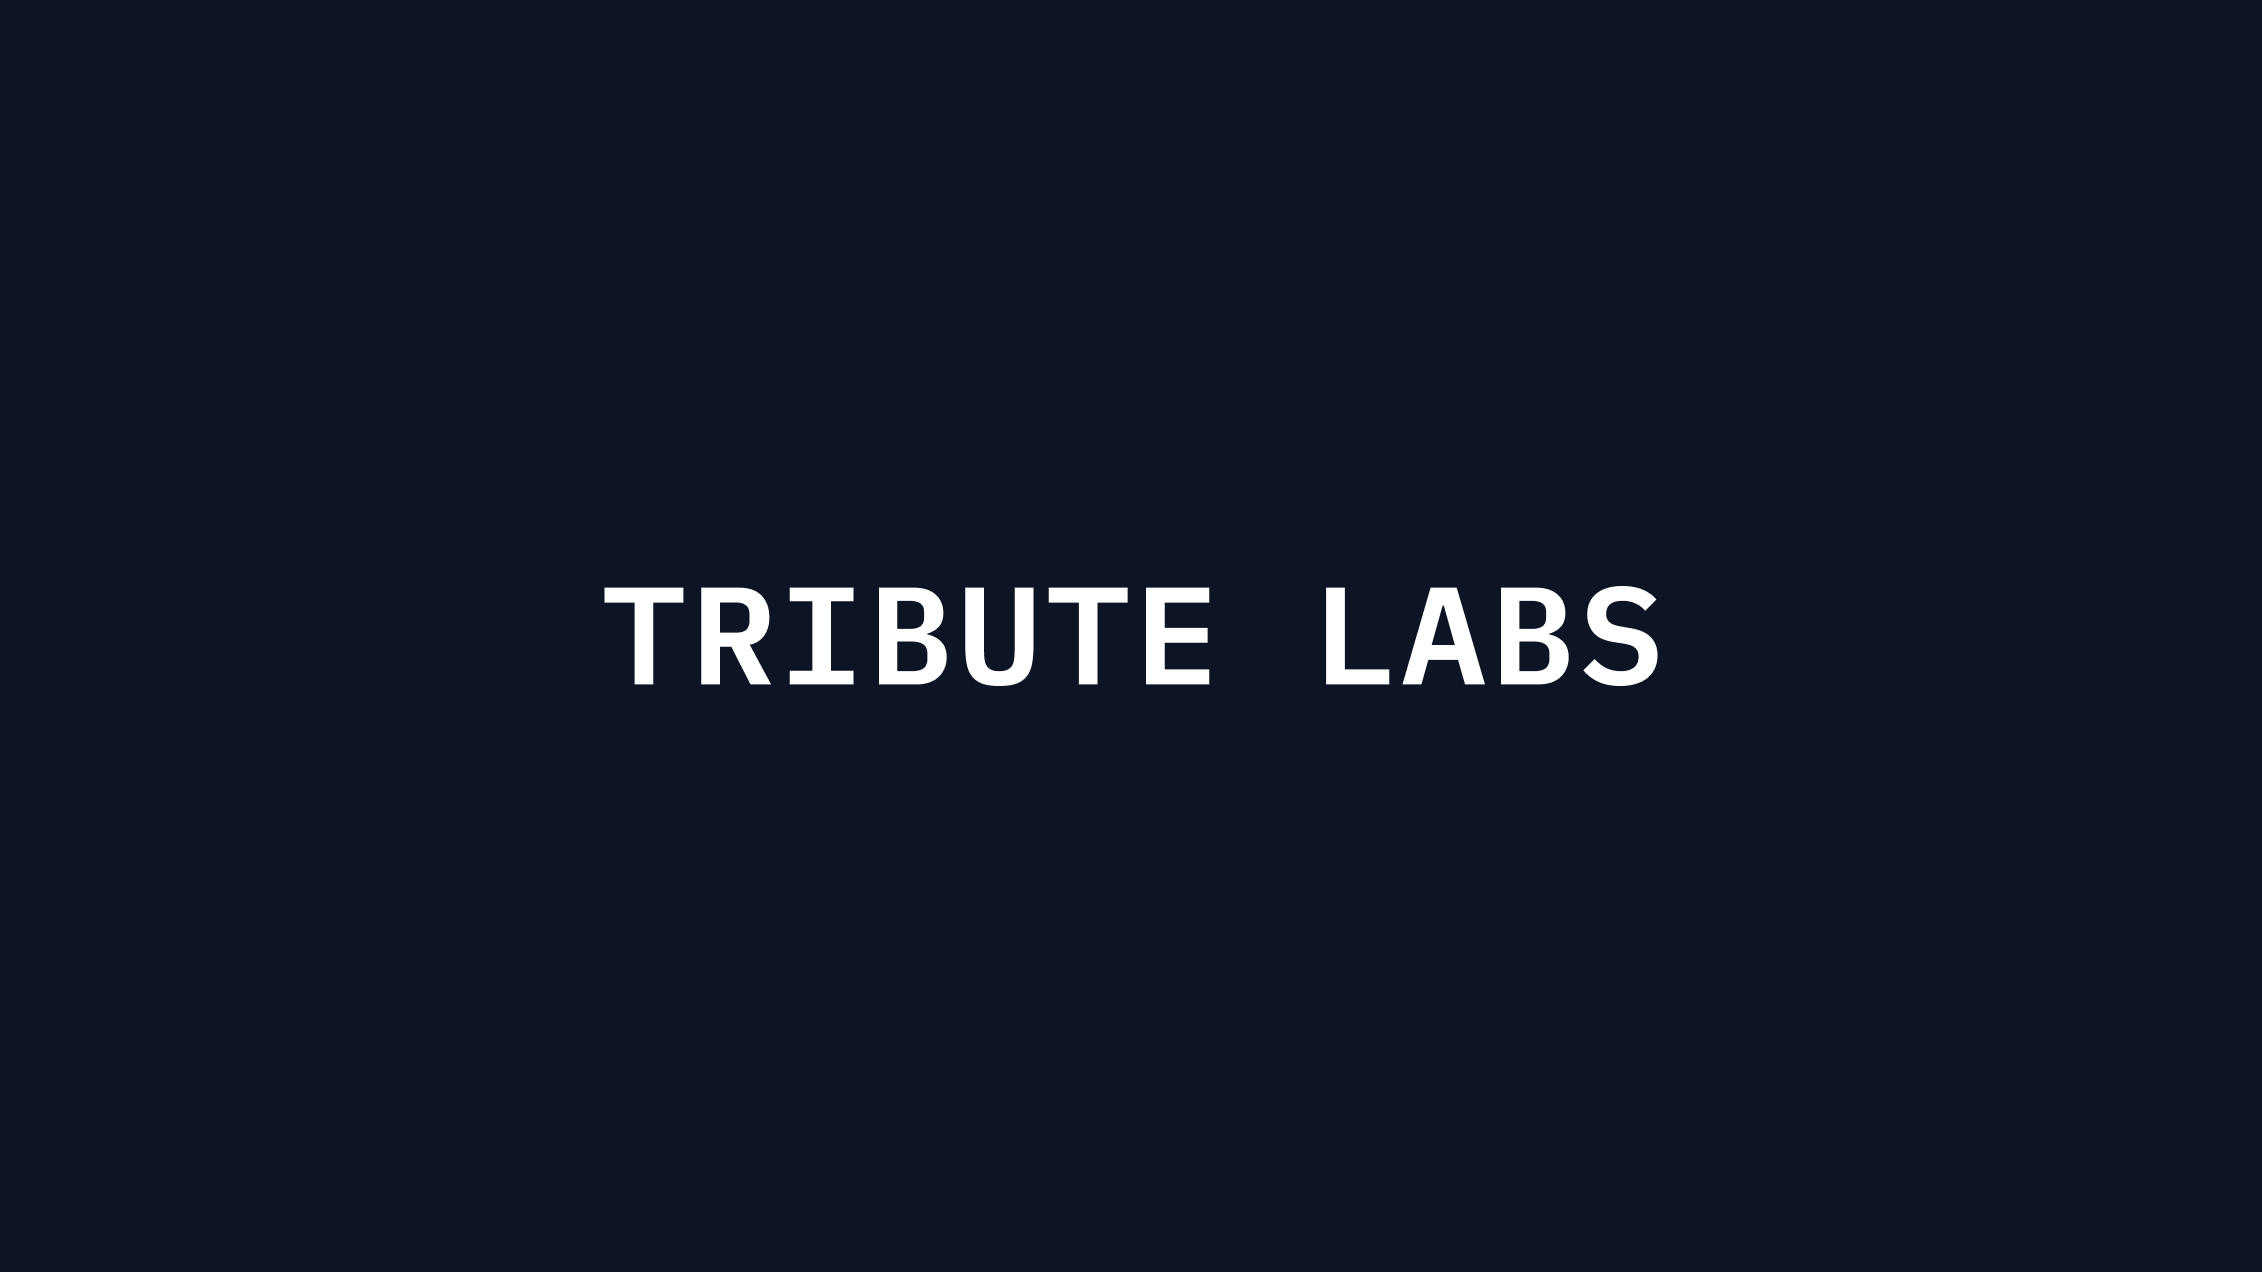 Tribute Labs trusts Center to power its complex data needs